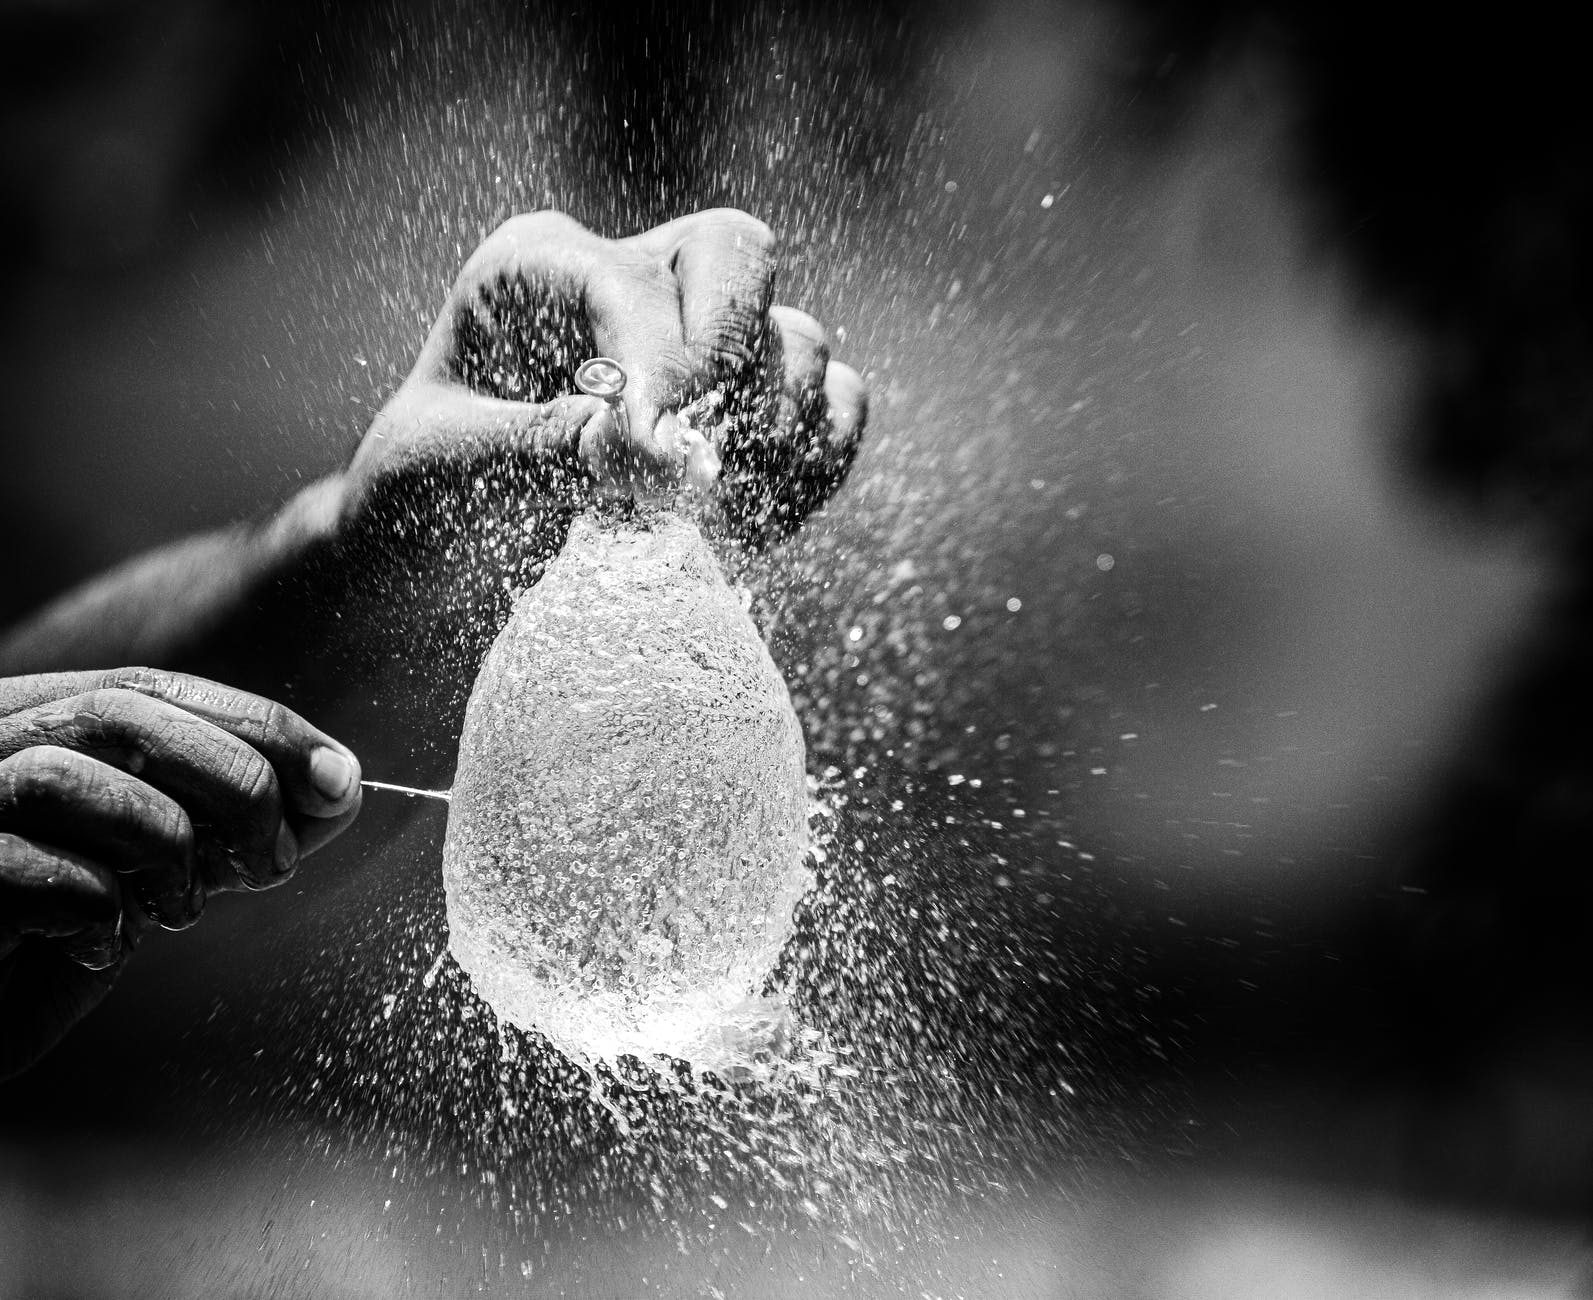 grayscale photo of person popping a water balloon